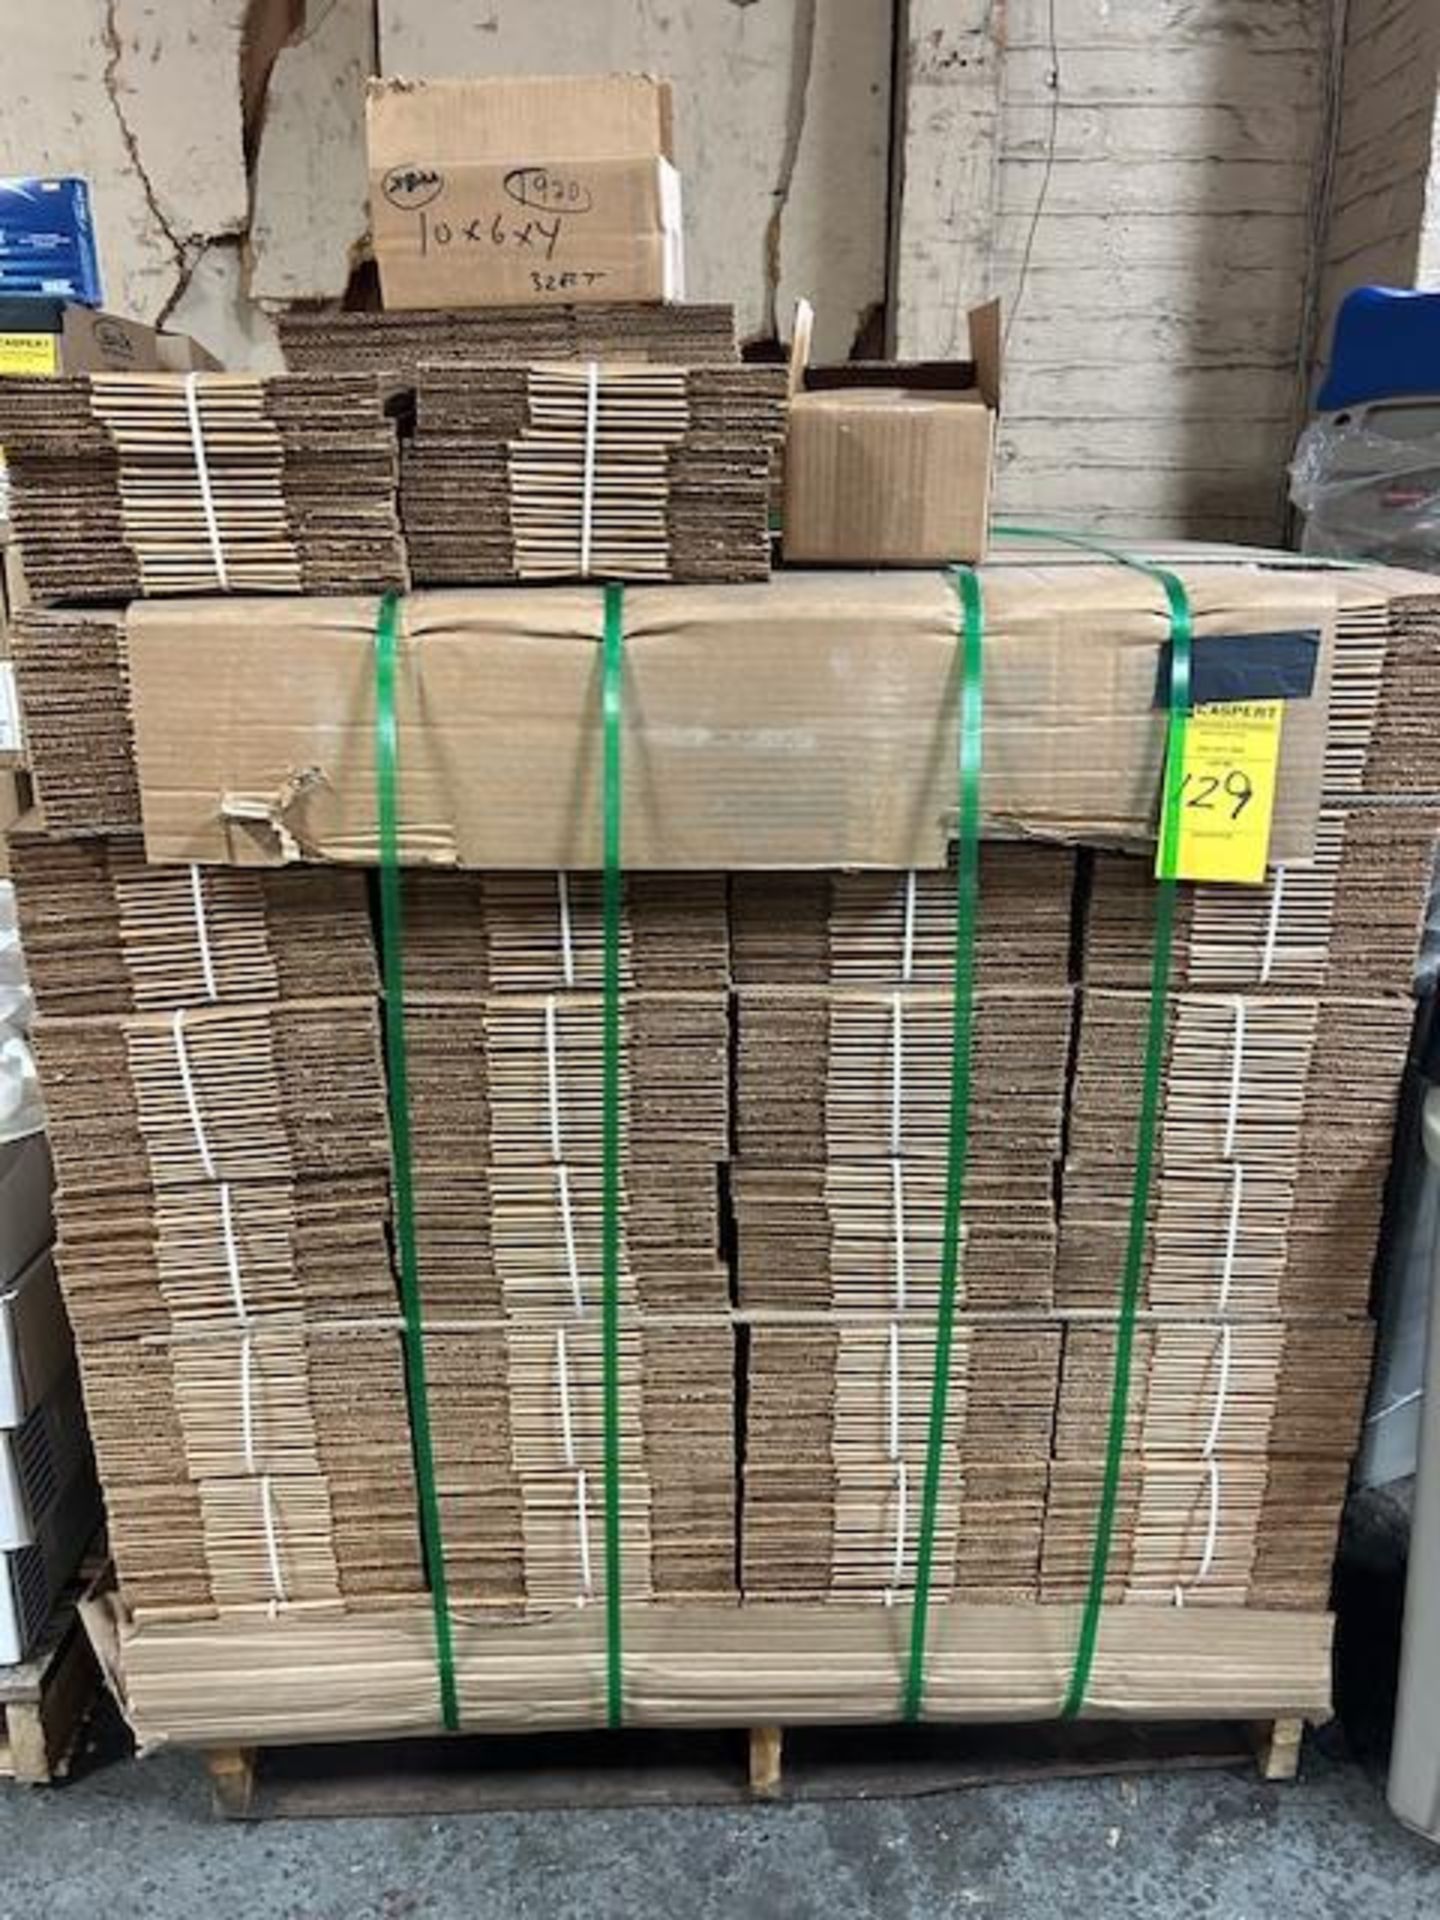 LOT - (1920) 10" x 6" x 4" Brown Corrugated Boxes